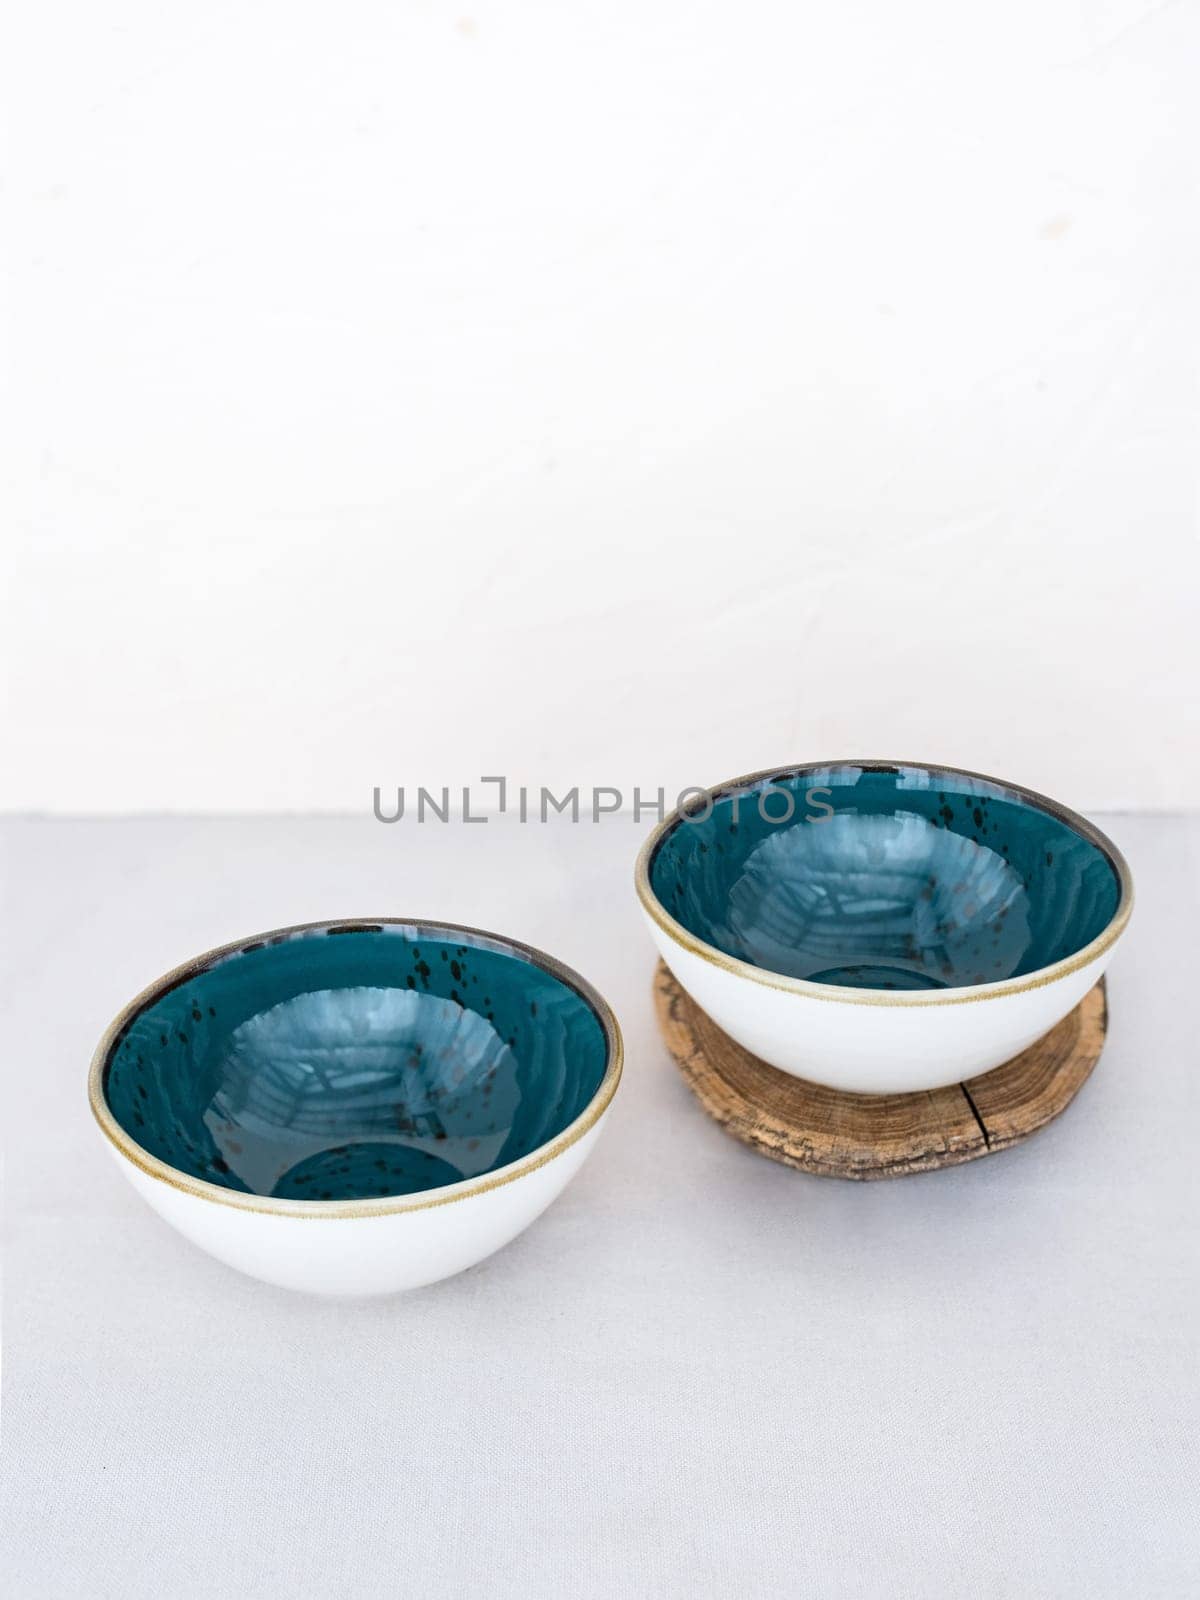 Two empty blue soup bowlson table on white background for your copy by dmitryz